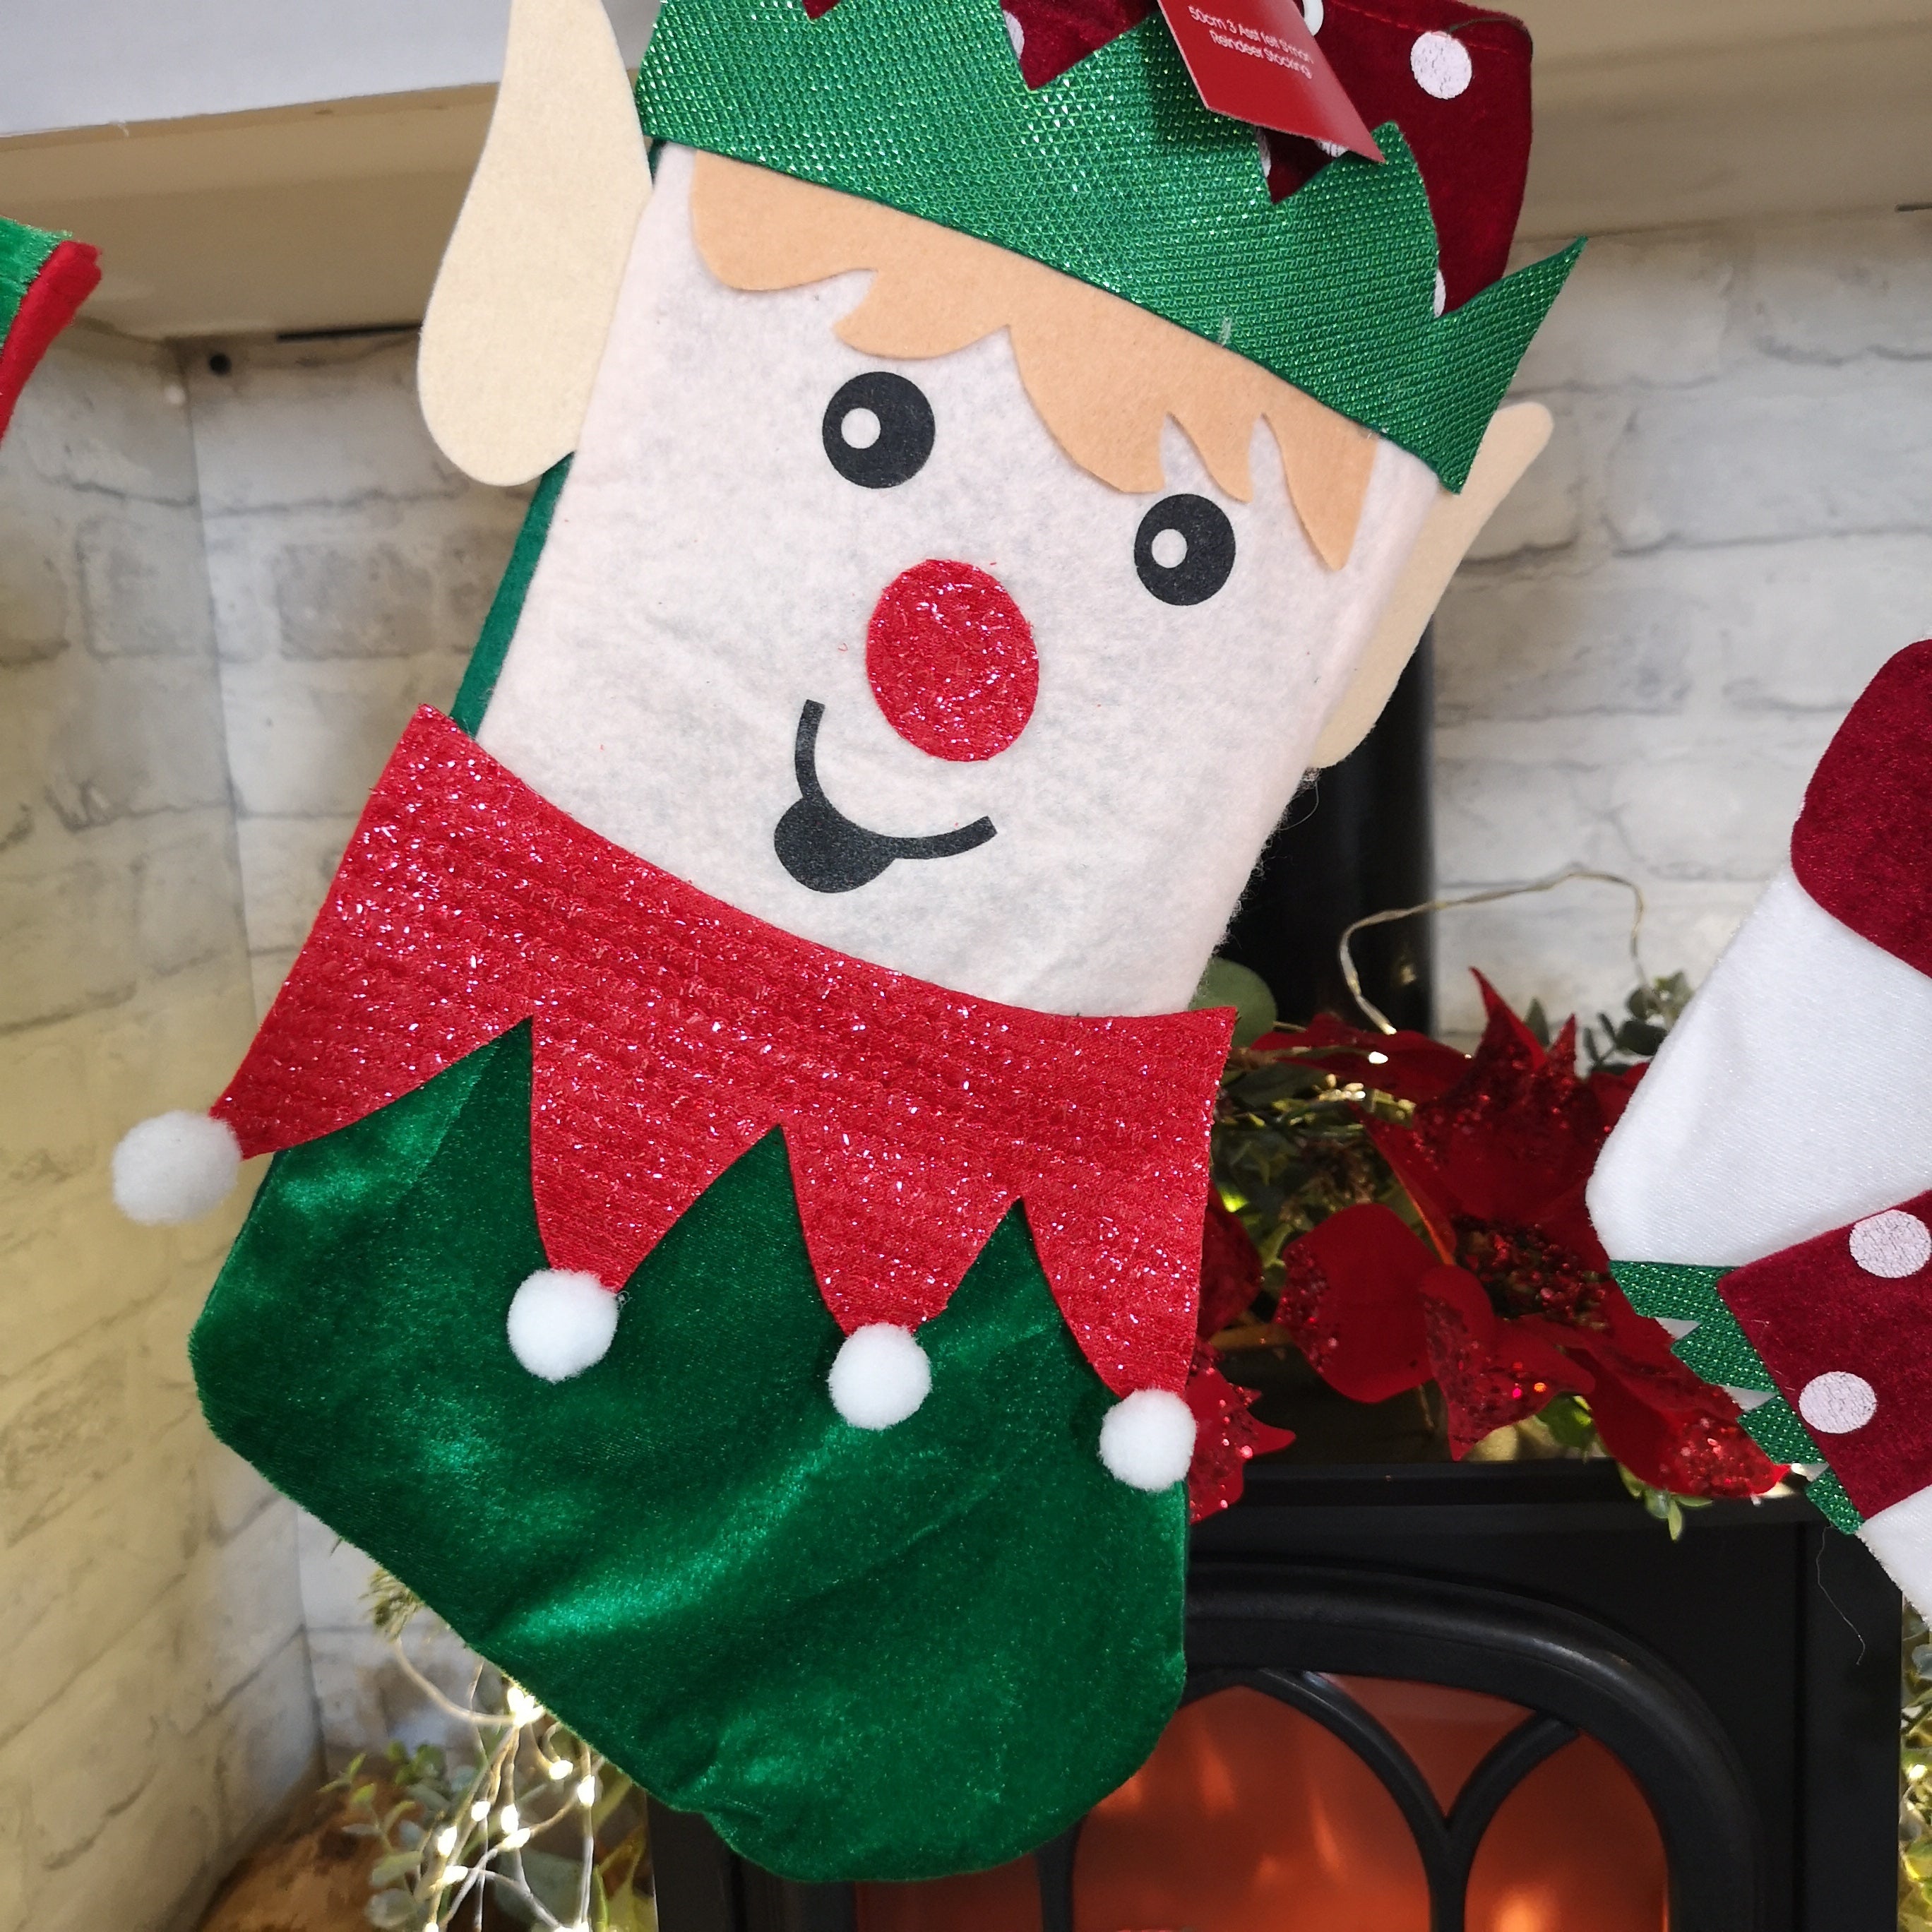 Bulk of 36 Hanging Christmas Stockings with 3 Different Designs - Santa, Snowman & Elf